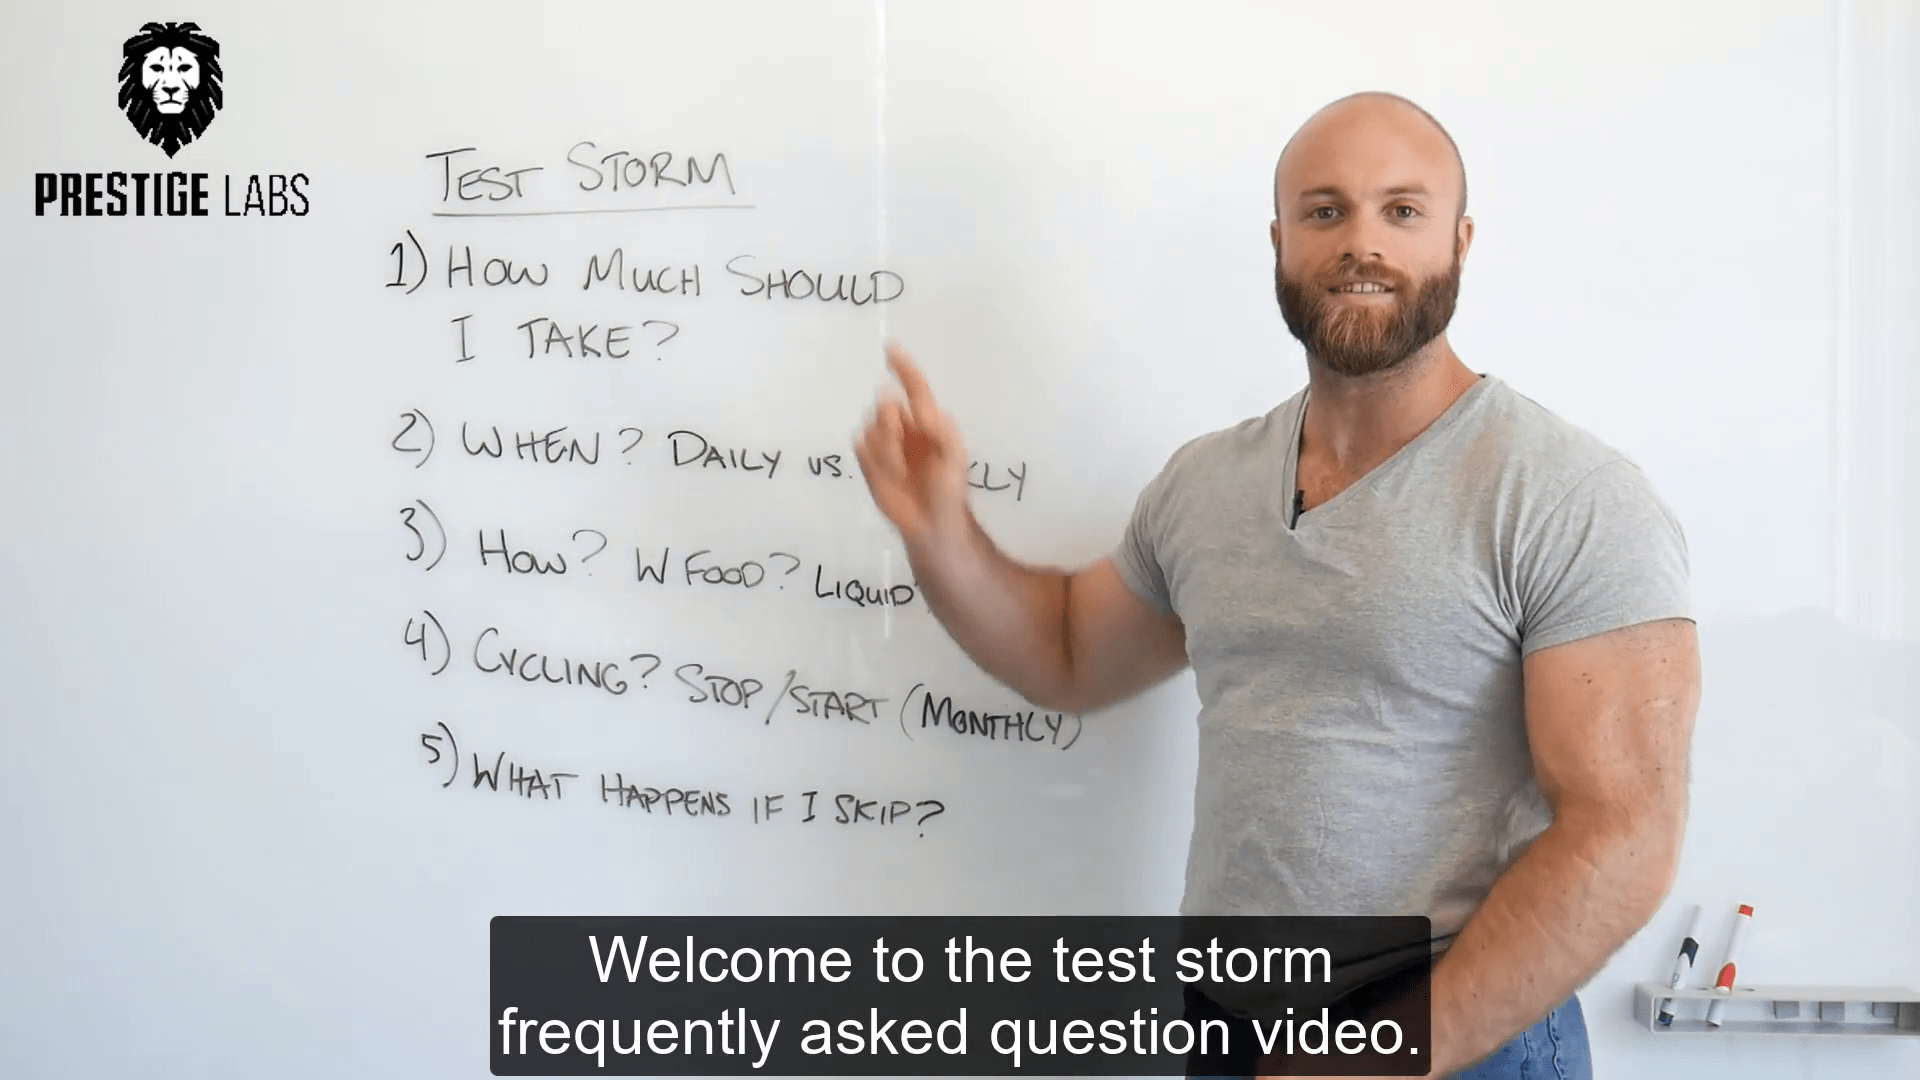 TEST STORM - How to Take: